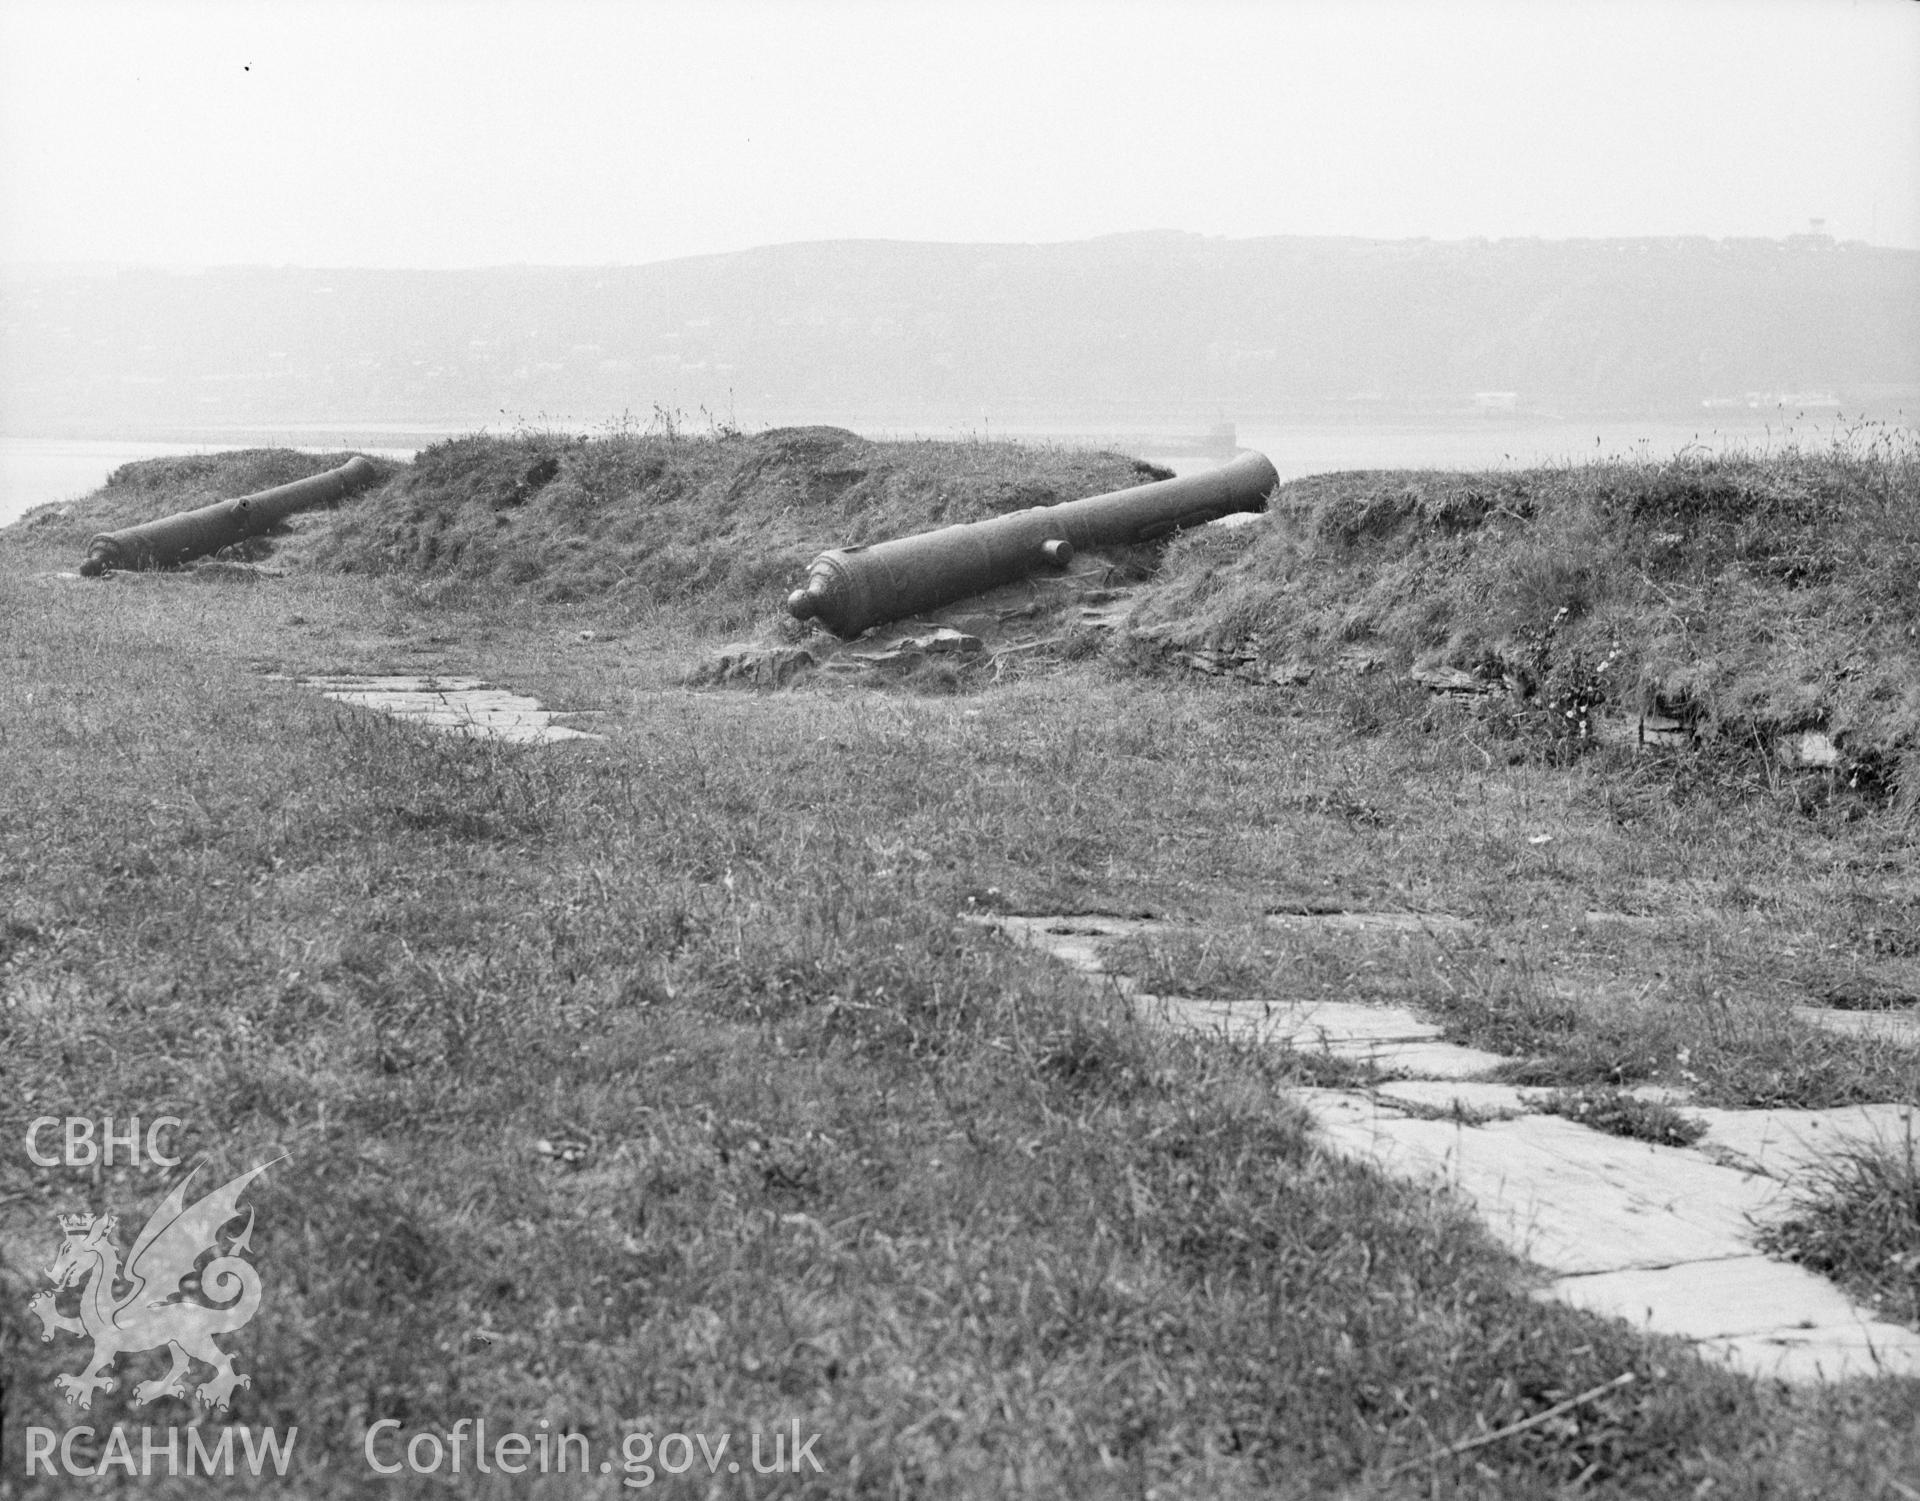 Digital copy of a nitrate negative showing Castle Point Old Fort, Fishguard.